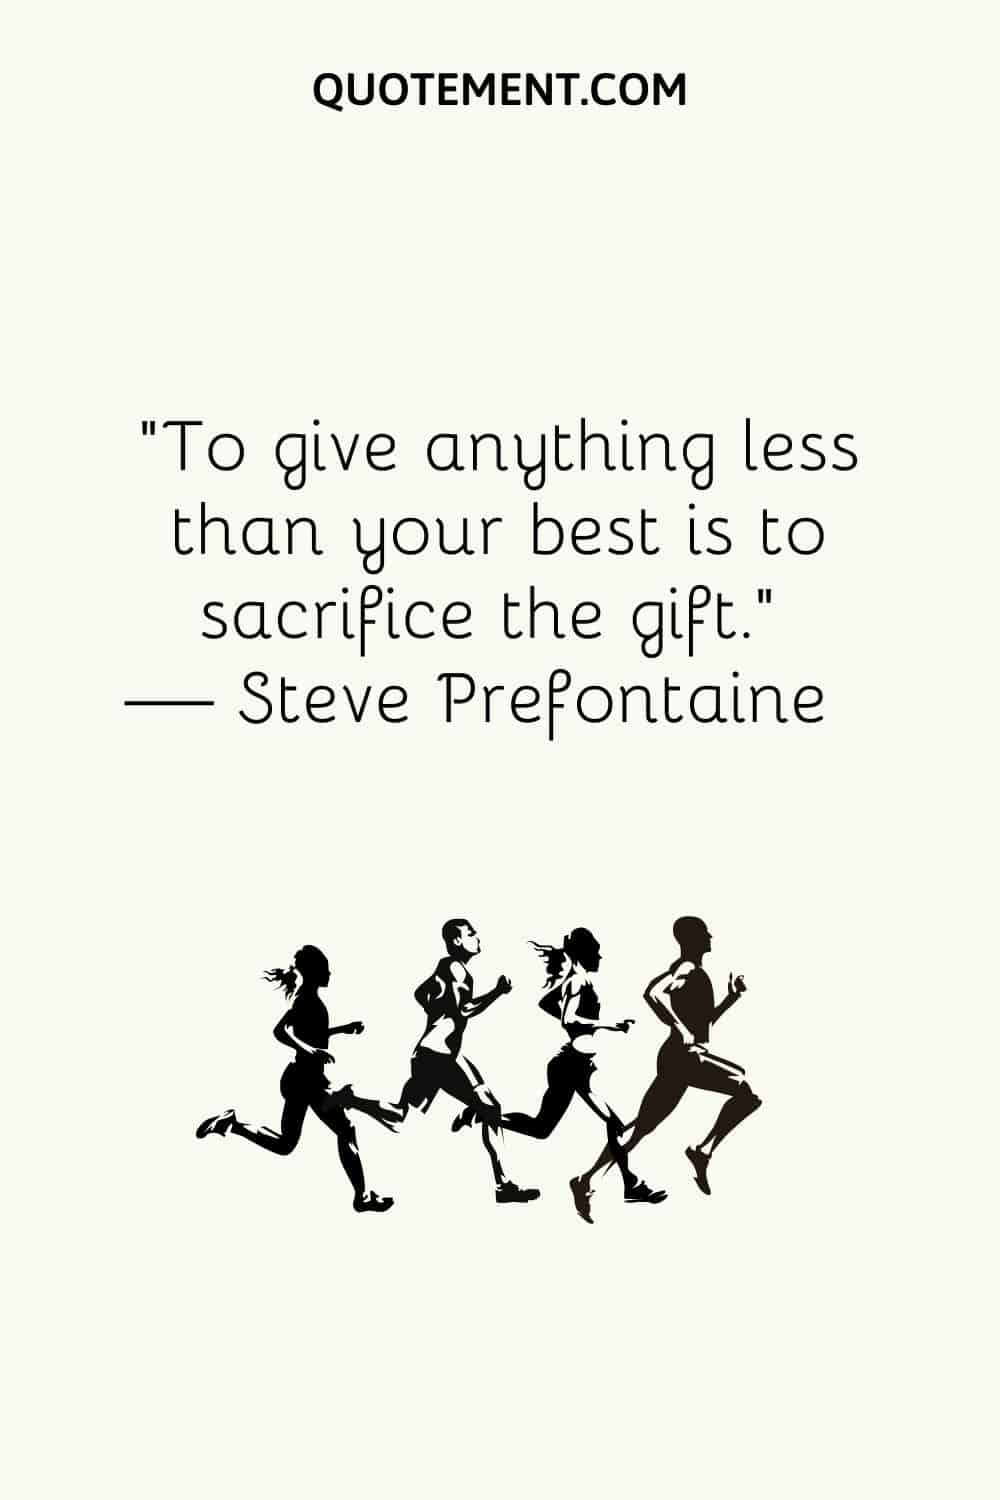 To give anything less than your best is to sacrifice the gift.